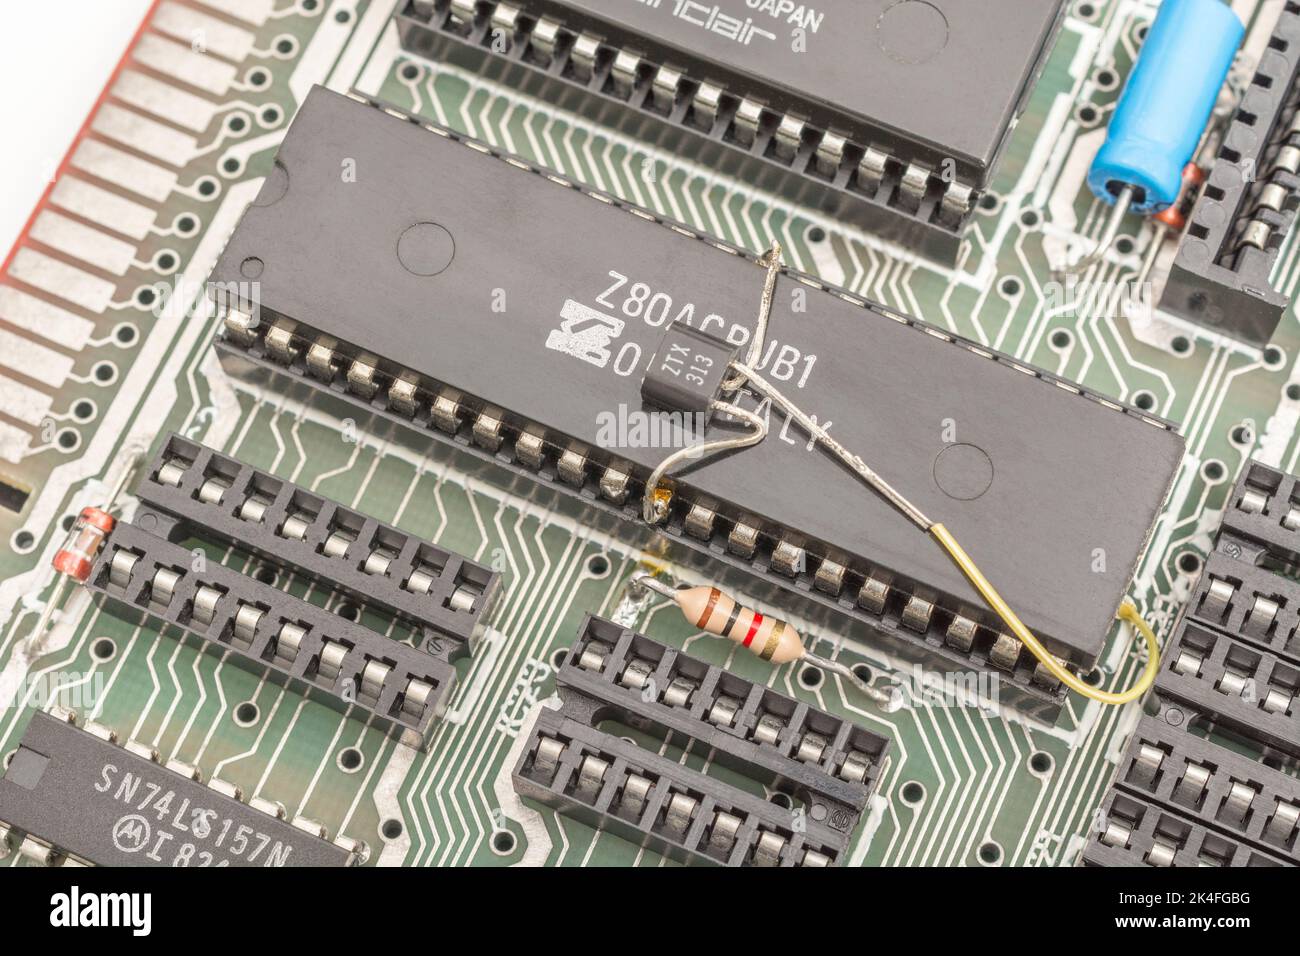 Retro computer (1982 Sinzlair ZX Spectrum) motherboard with legendary 40-pin Z80 CPU processor. For semiconductors, microchips, old 1980s computers. Stock Photo